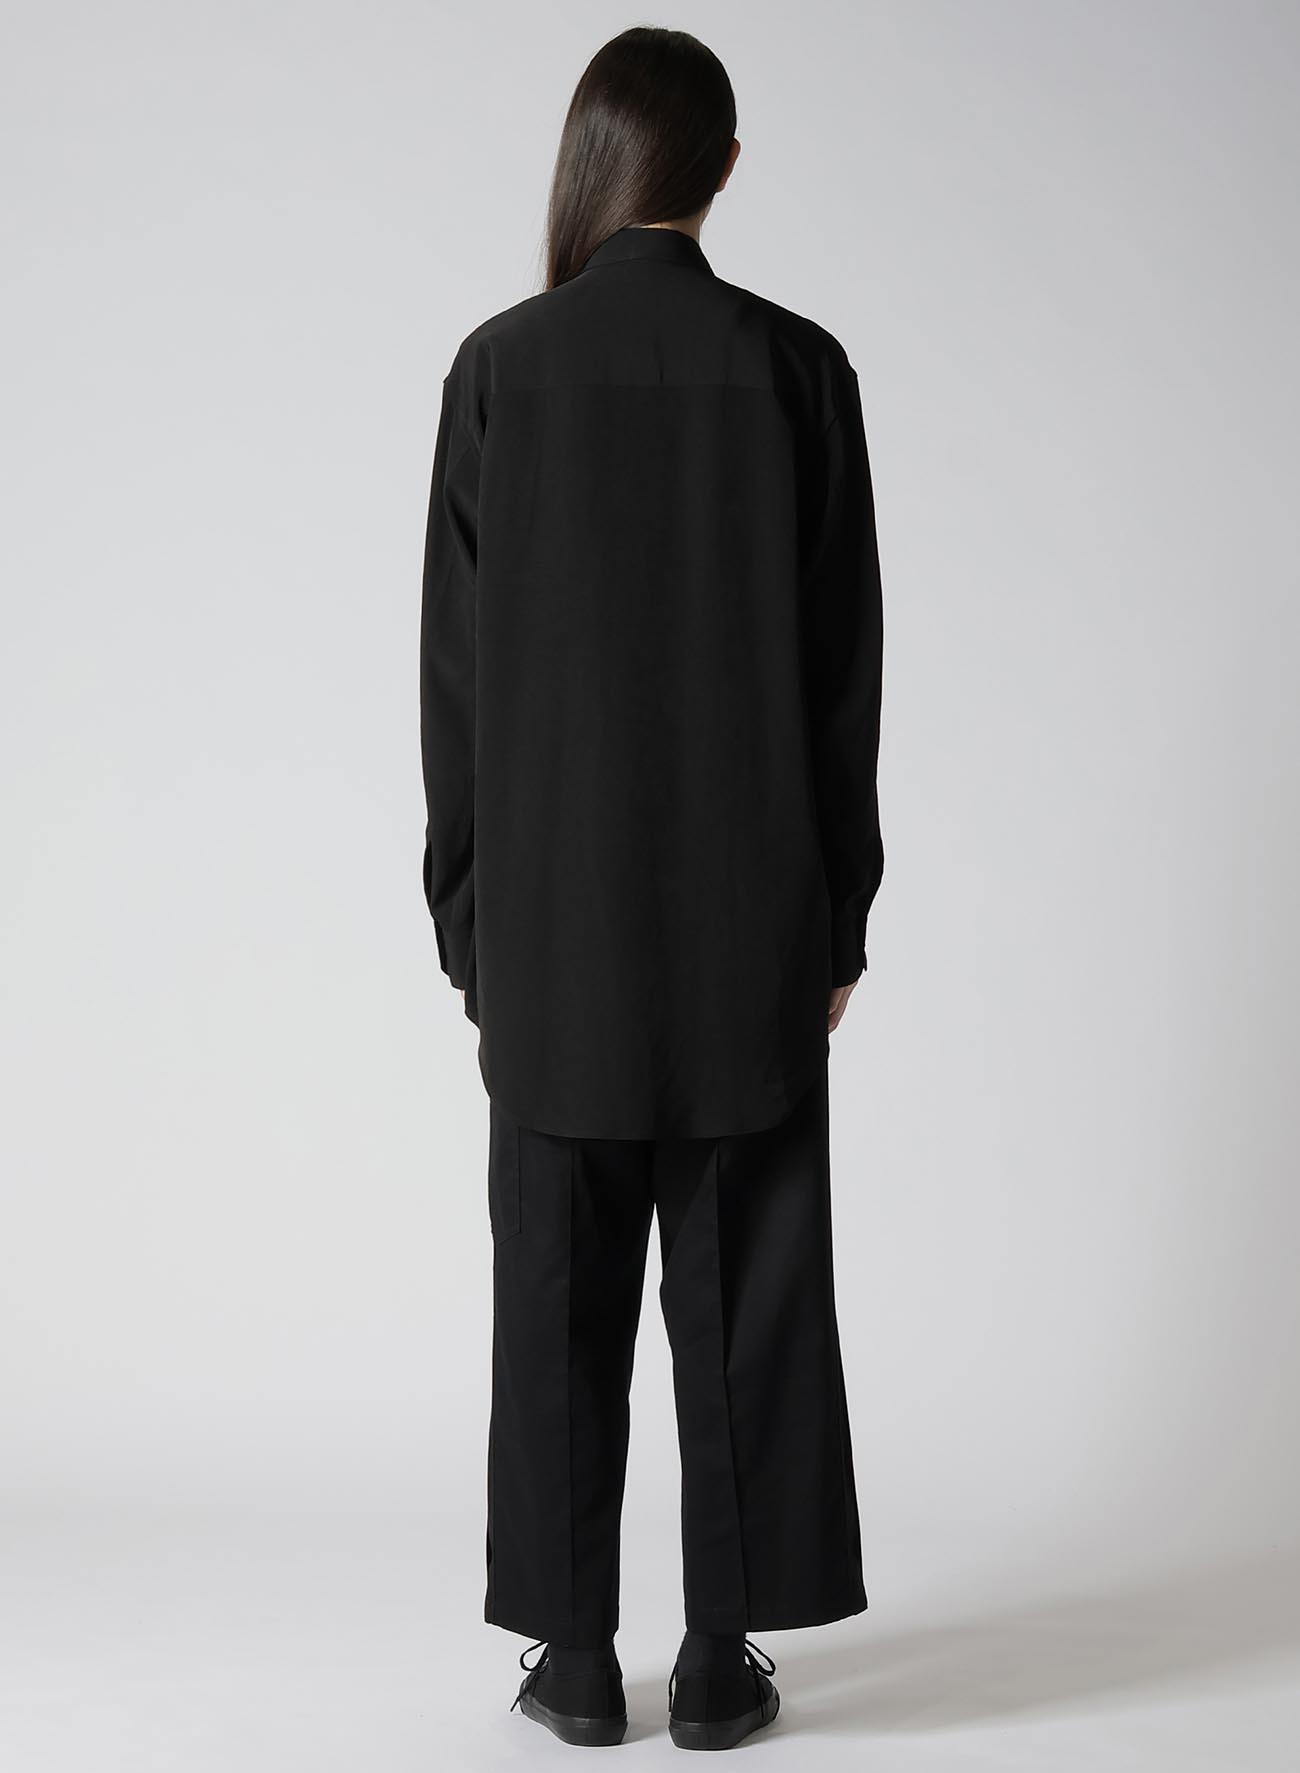 TRIACETATE/POLYESTER CREPE de CHINE LEFT DOUBLE LAYERED SHIRT